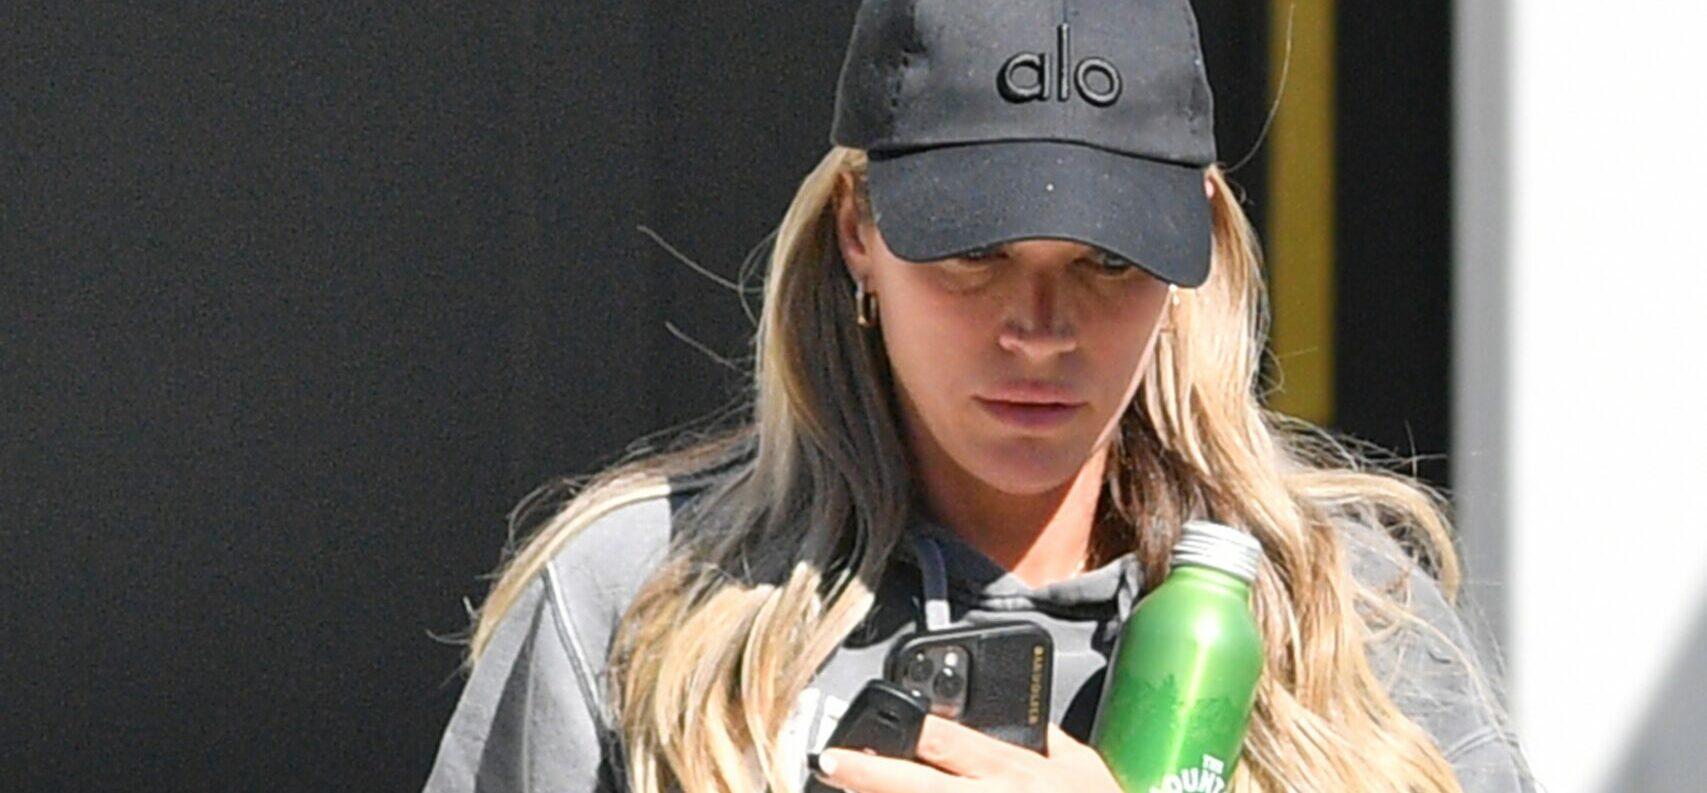 Teddi Mellencamp is seen leaving the home of RHOBH star Dorit Kemsley who was reportedly held at gunpoint by 3 men and robbed of jewelry and handbags during 20-minute home invasion